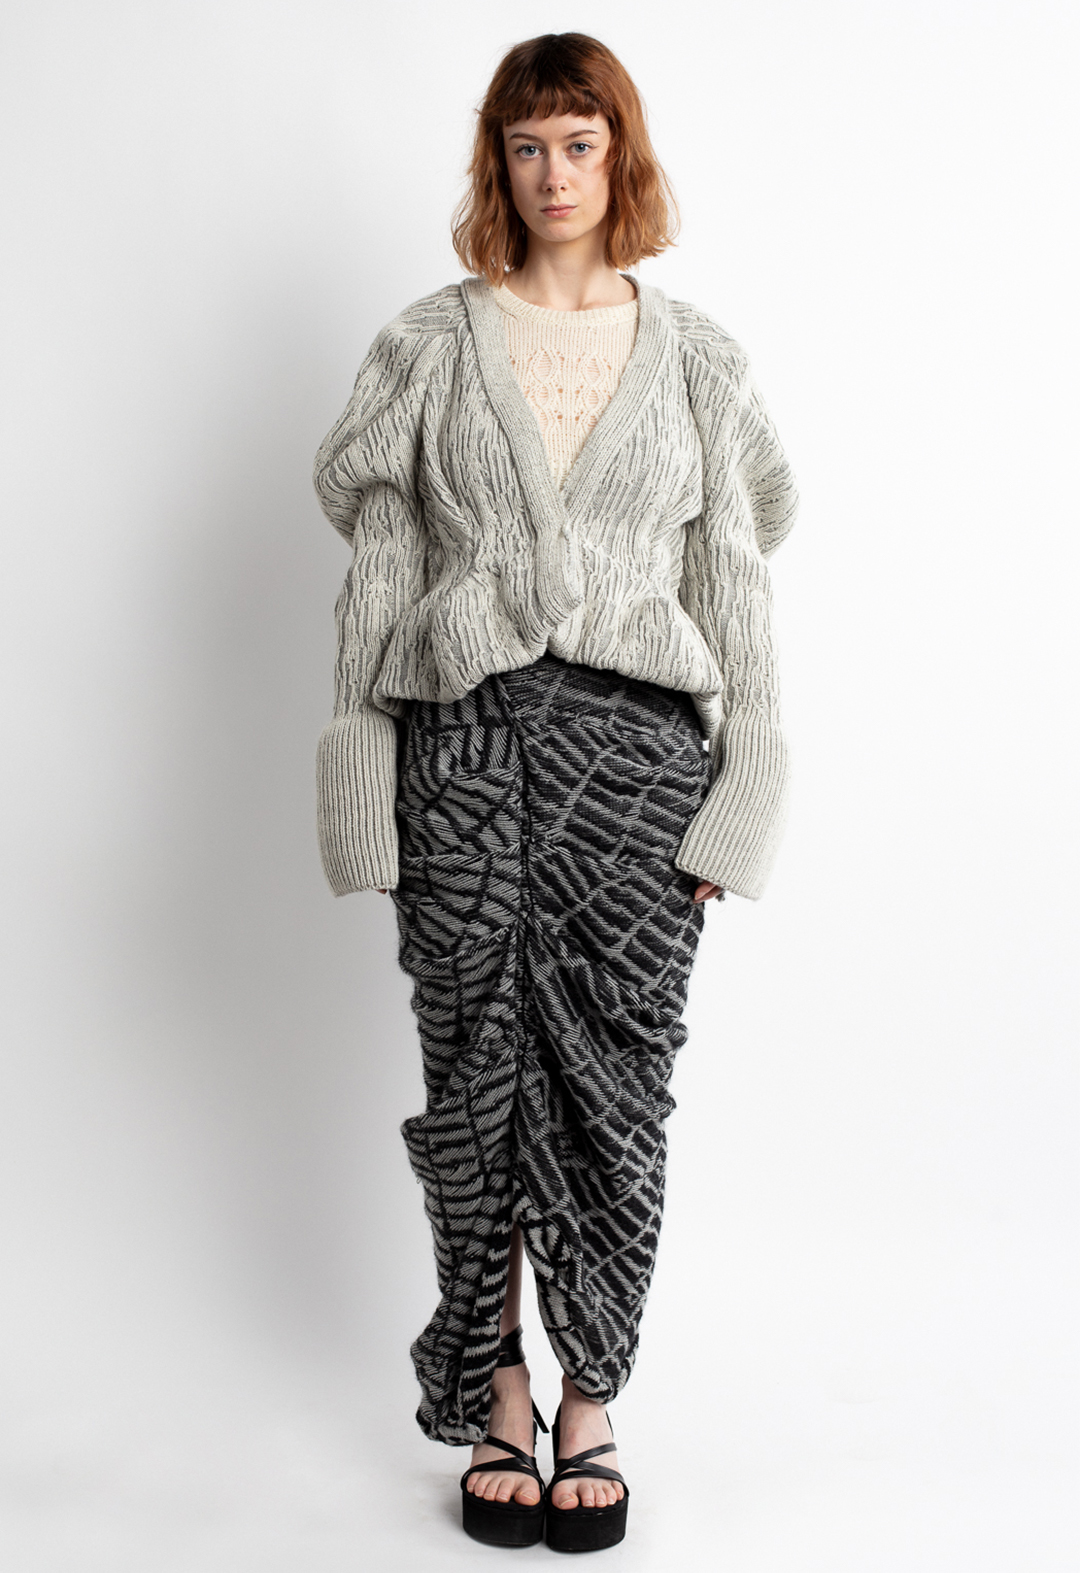 This look is inspired by many aspects of old and dried trees, such as bark textures, twisted roots, and shapes of branches. This jacket's shape is three-dimensional, with its draped sleeves and waist to hemline. The bottoms of the sleeves are knitted with full-cardigan fabric. The cropped inner top is fitted to her bodice, and the high-waisted skirt is draped asymmetrically. The designed ribbed fabric of the jacket is knitted on Stoll. The sweater is knitted on every other needle, and the skirt is knitted as jacquard fabric with a designed punch card on a Brother knitting machine. For the jacquard fabric of the skirt, the wrong side is used to show its floated parts. 